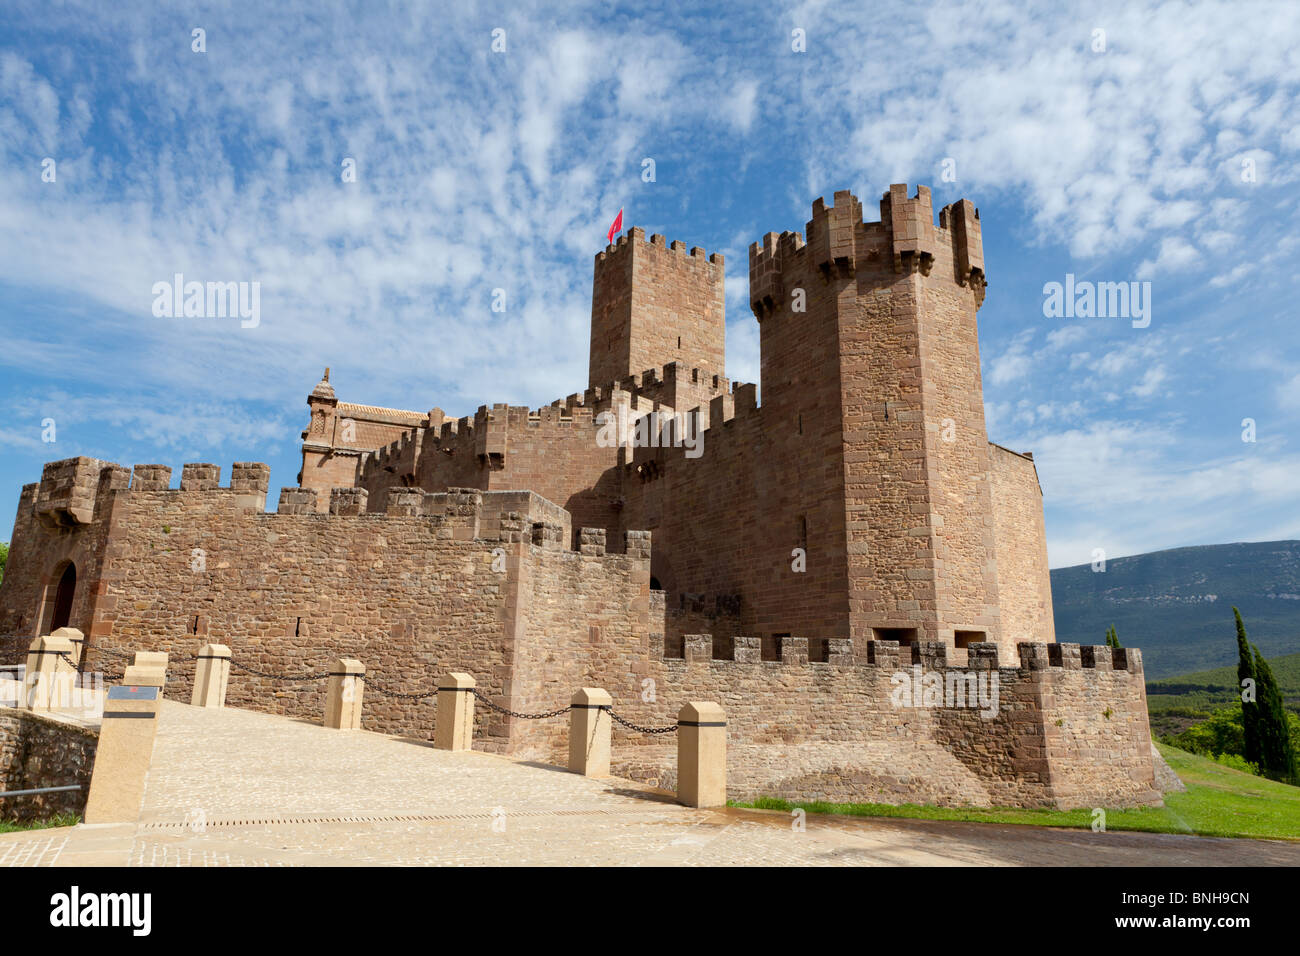 Castle Javier in the province of Navarre - Basque region of Spain. Famous for being the birthplace of St Francis Xavier. Stock Photo